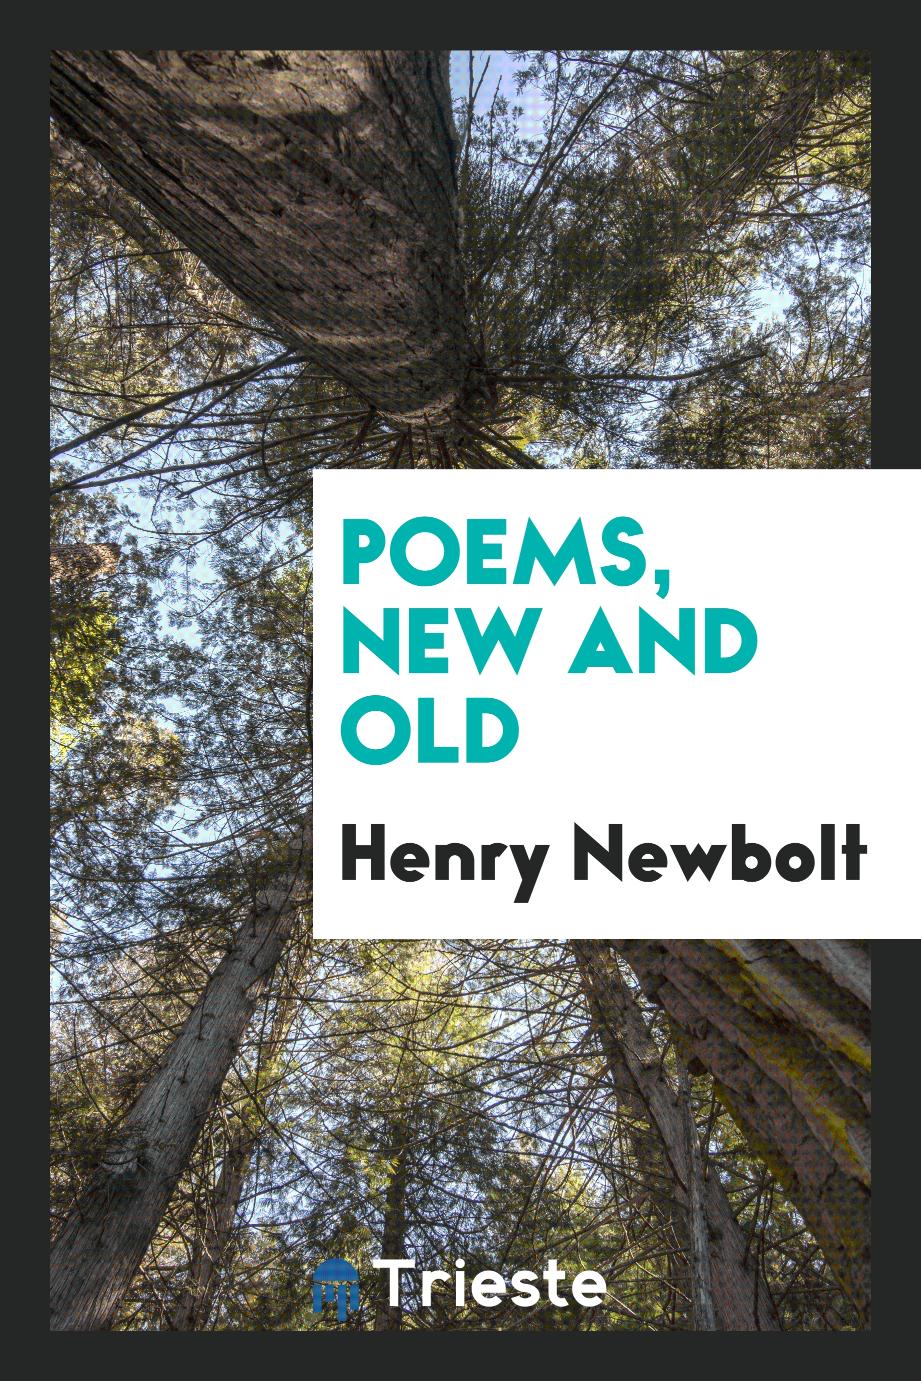 Poems, new and old